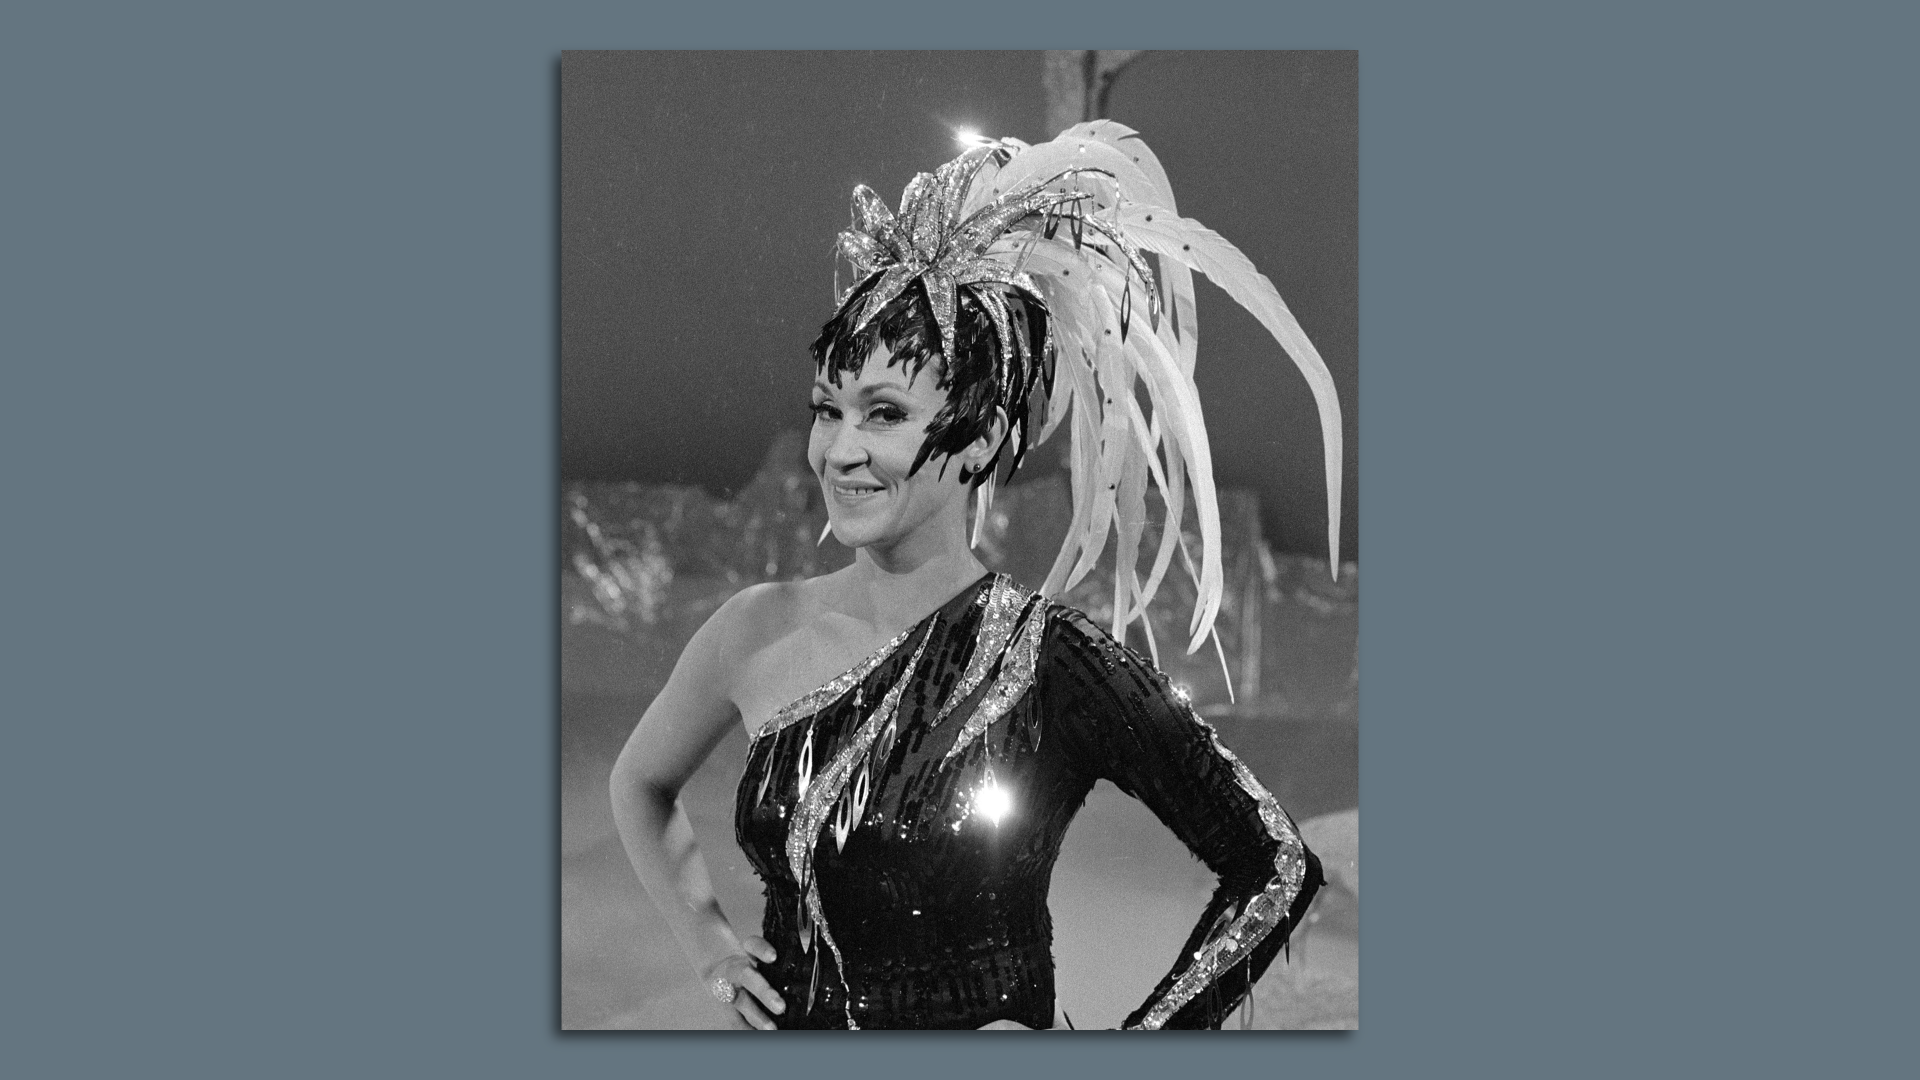 Chita Rivera poses with her hands on her waist, wearing a big feathered headdress